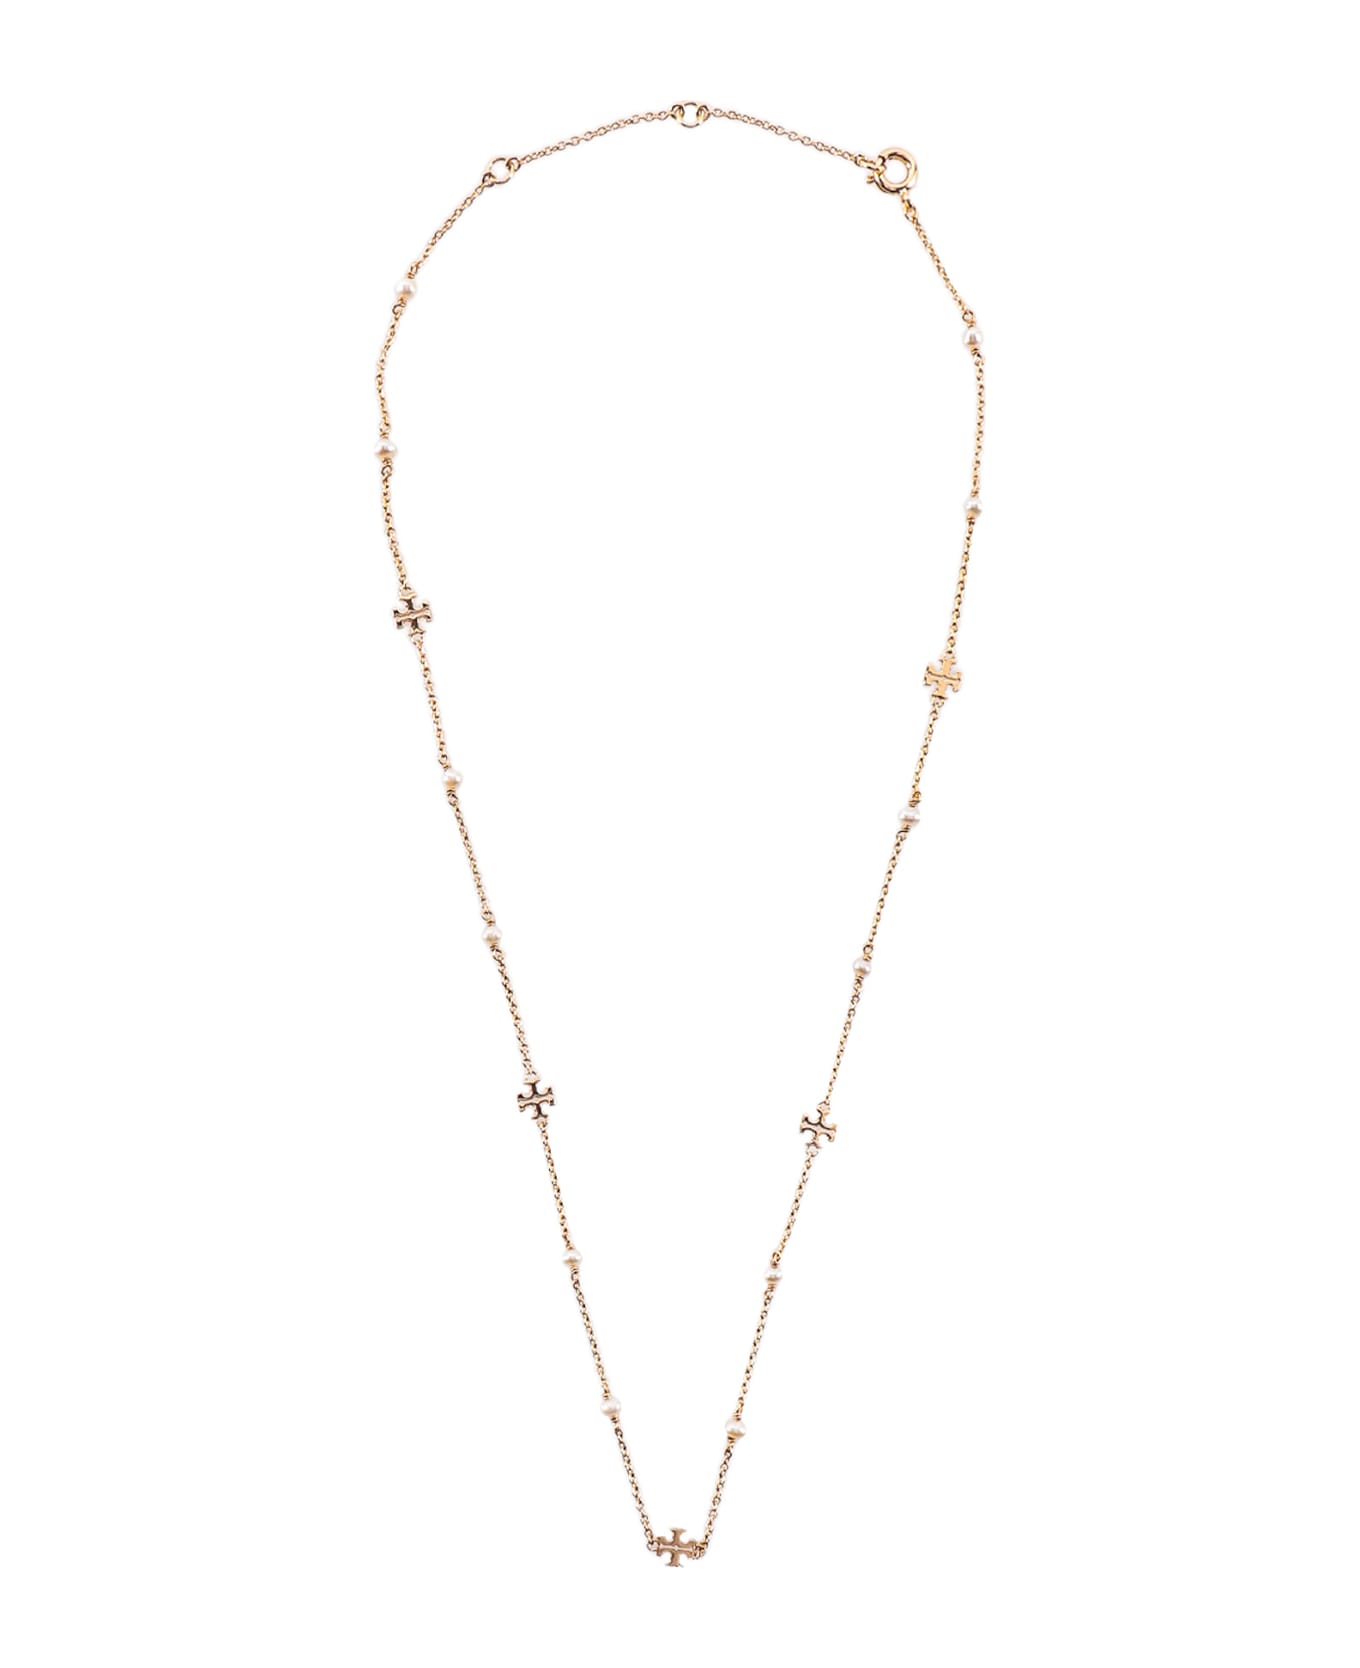 Tory Burch Necklace - Gold ネックレス